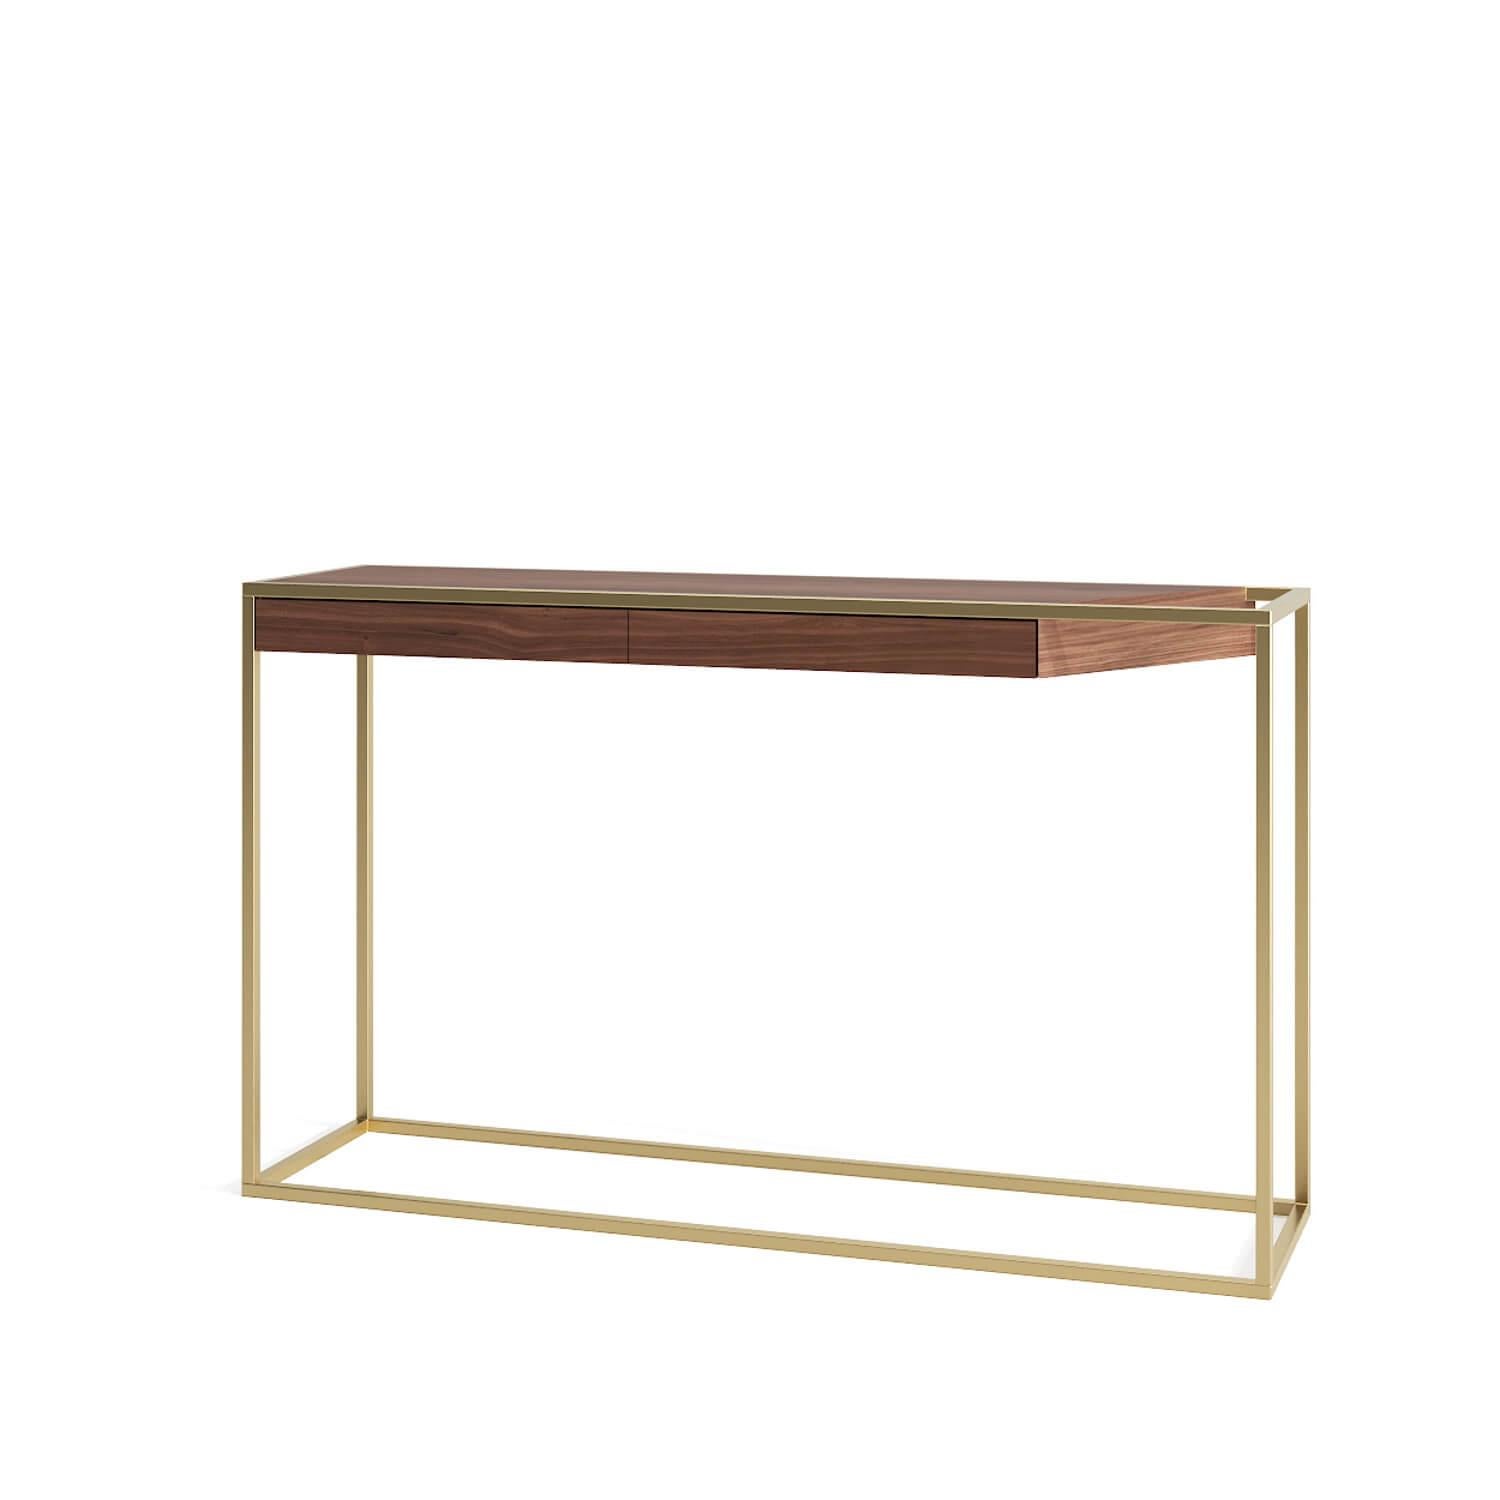 Modern Minimalist Rectangular Console Table Oak Wood and Brushed Stainless Steel For Sale 4